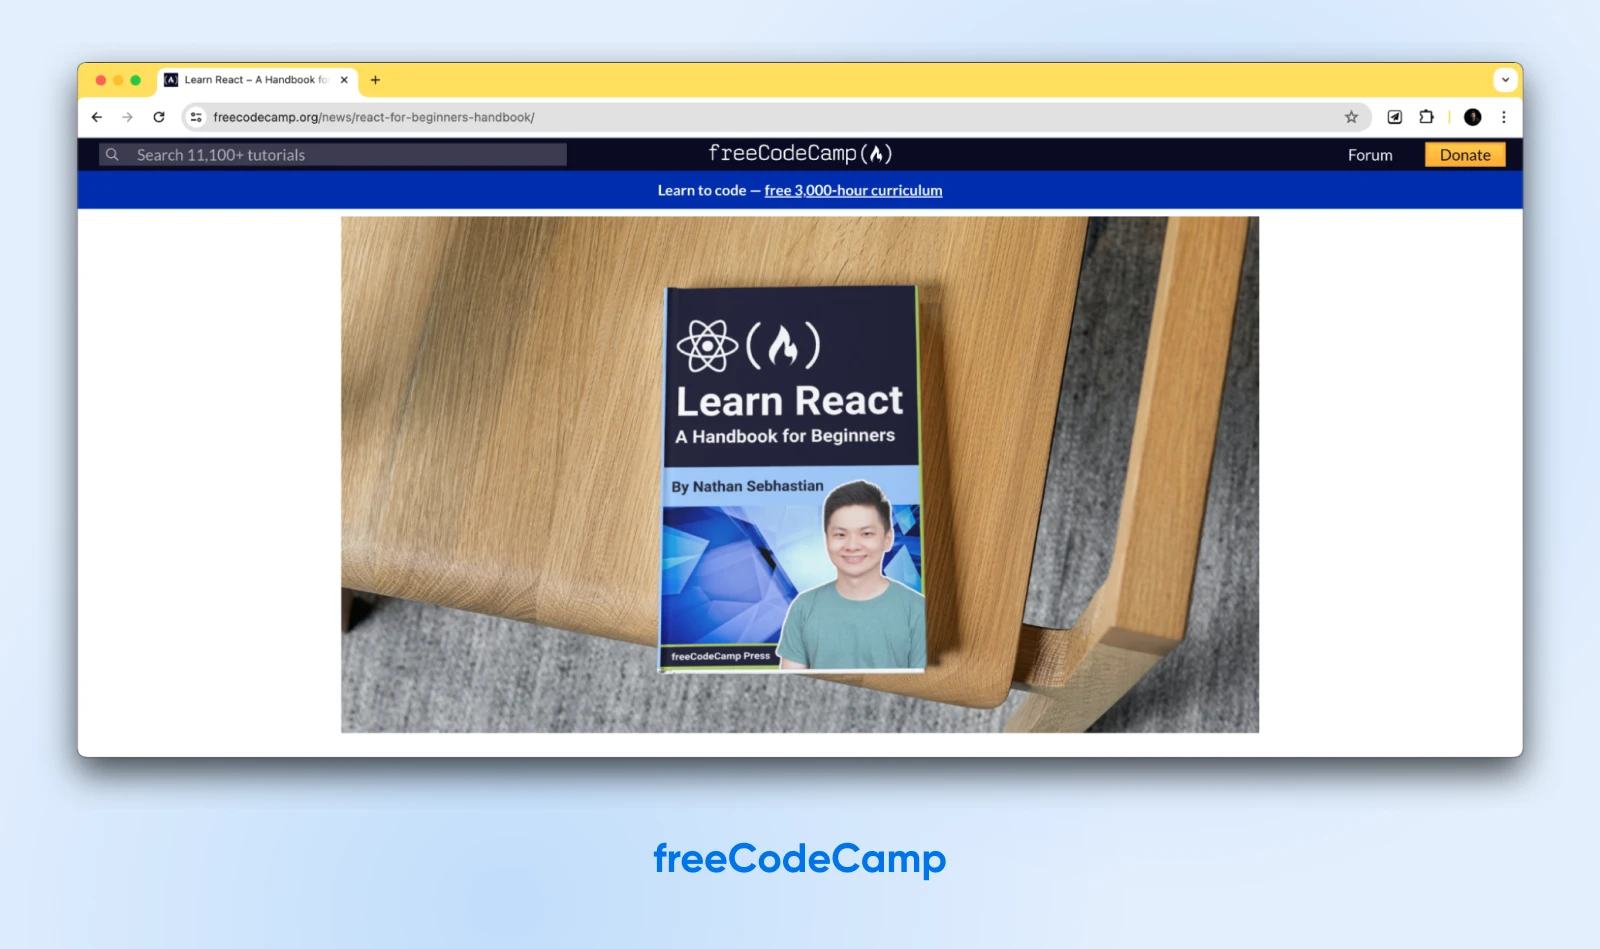 The cover image of freeCodeCamp's "Learn React: A Handbook for Beginners" shows a smiling young man